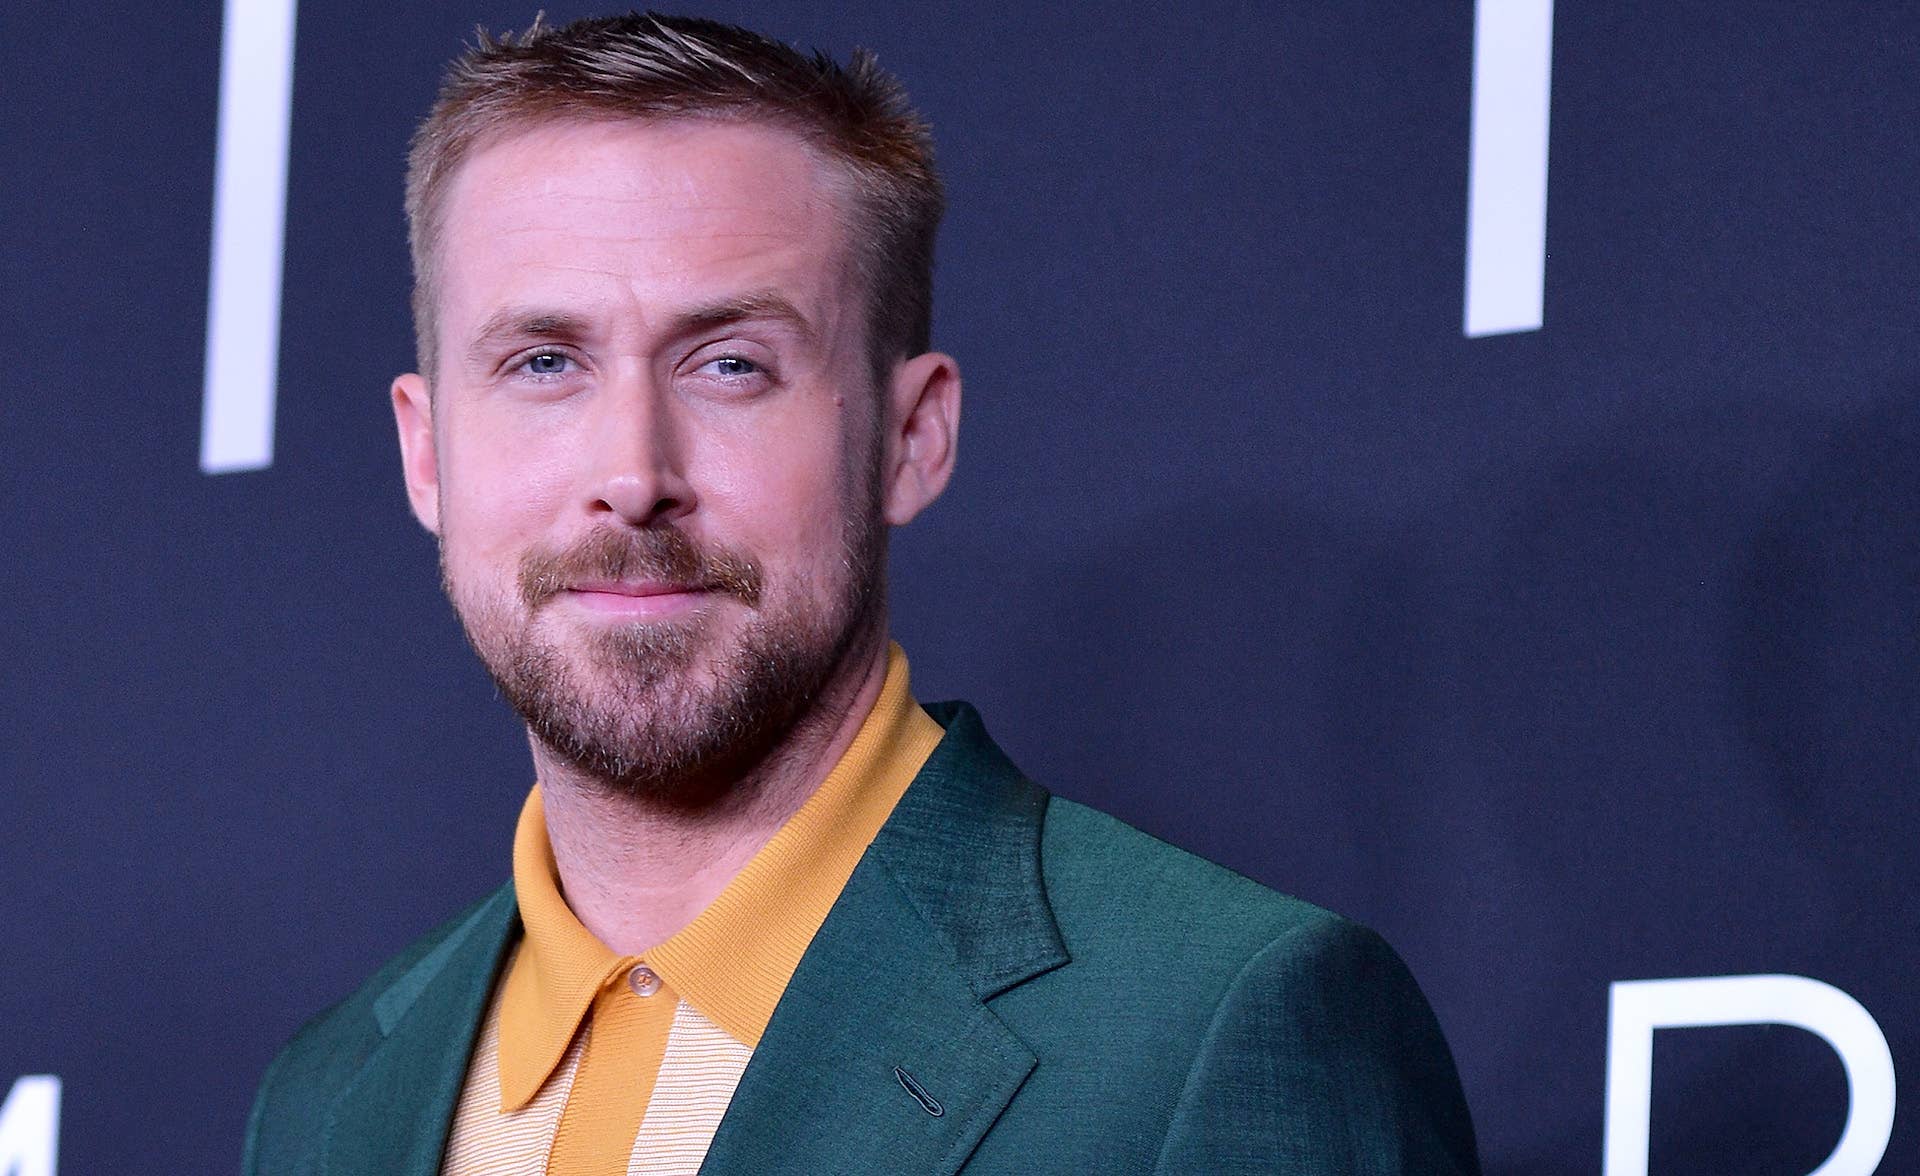 Ryan Gosling attends premiere for 'First Man'